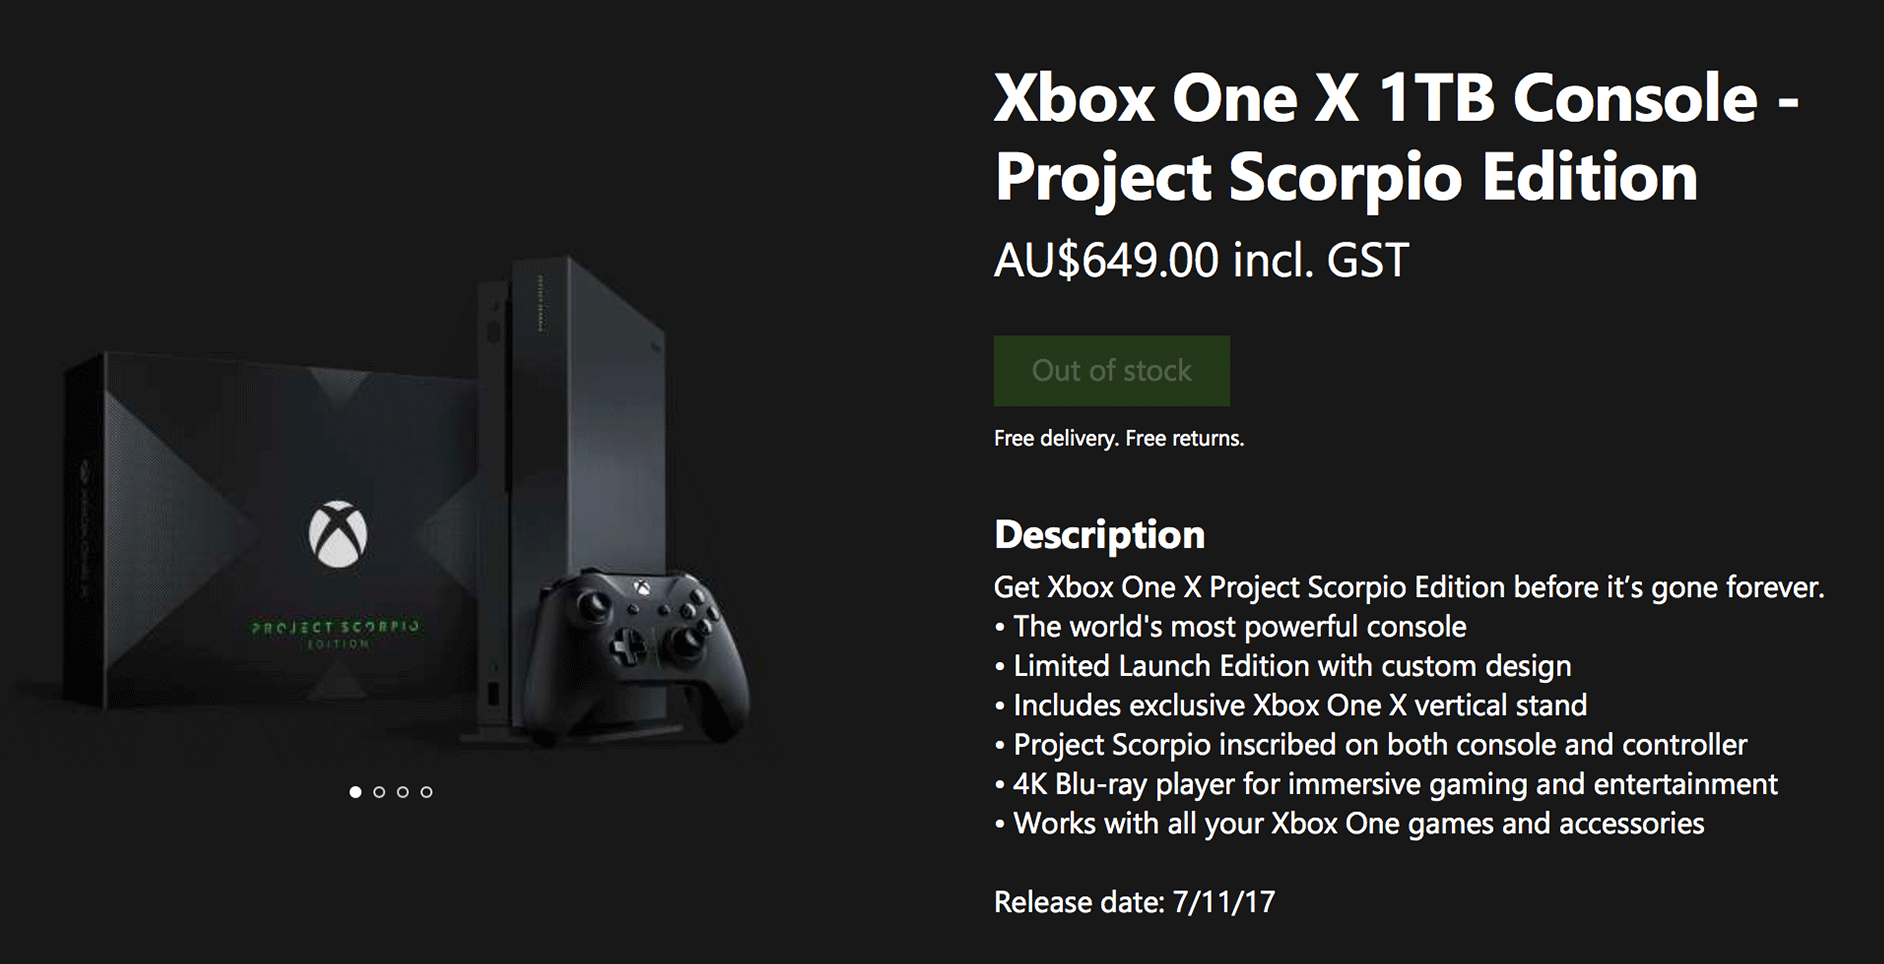 Australian Microsoft Store Has Already Sold Out Of Xbox One X Project Scorpio Edition